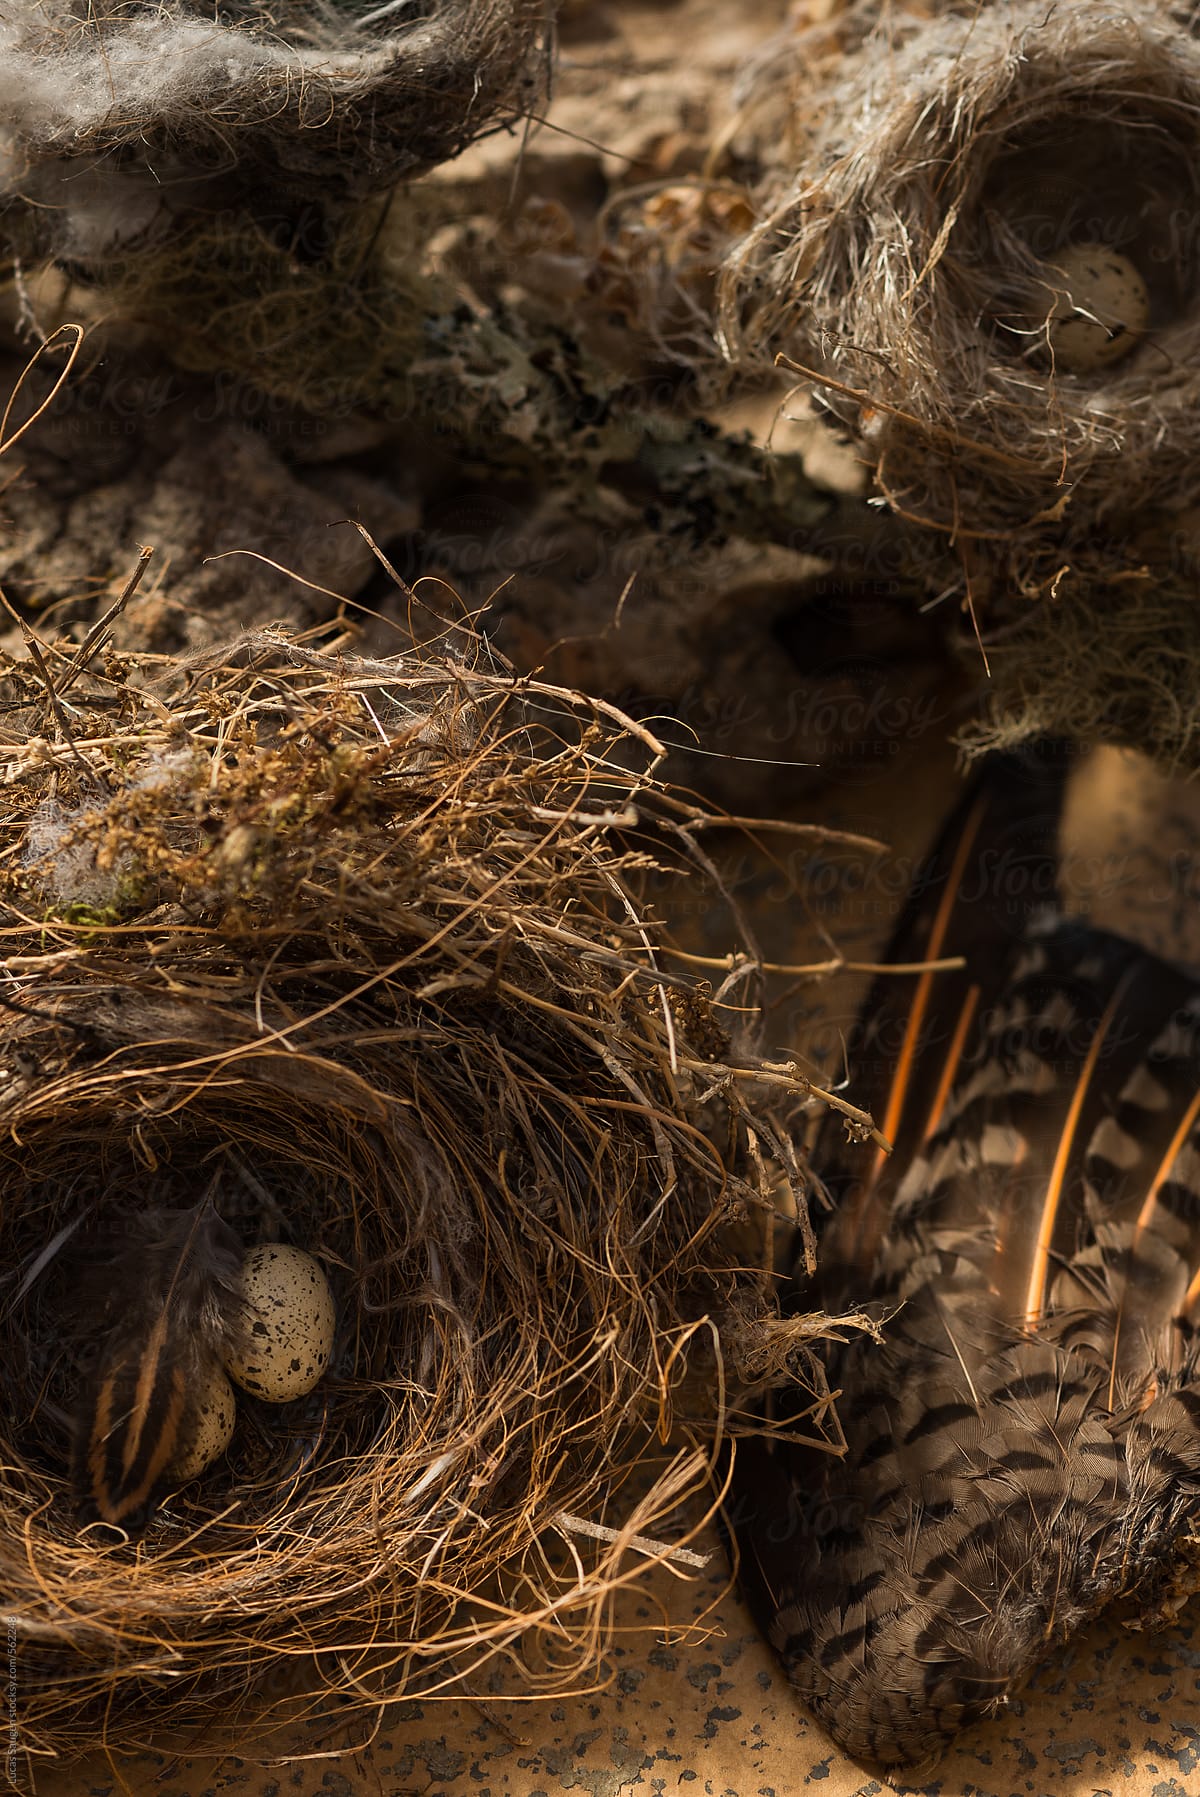 A couple of bird nests and eggs.